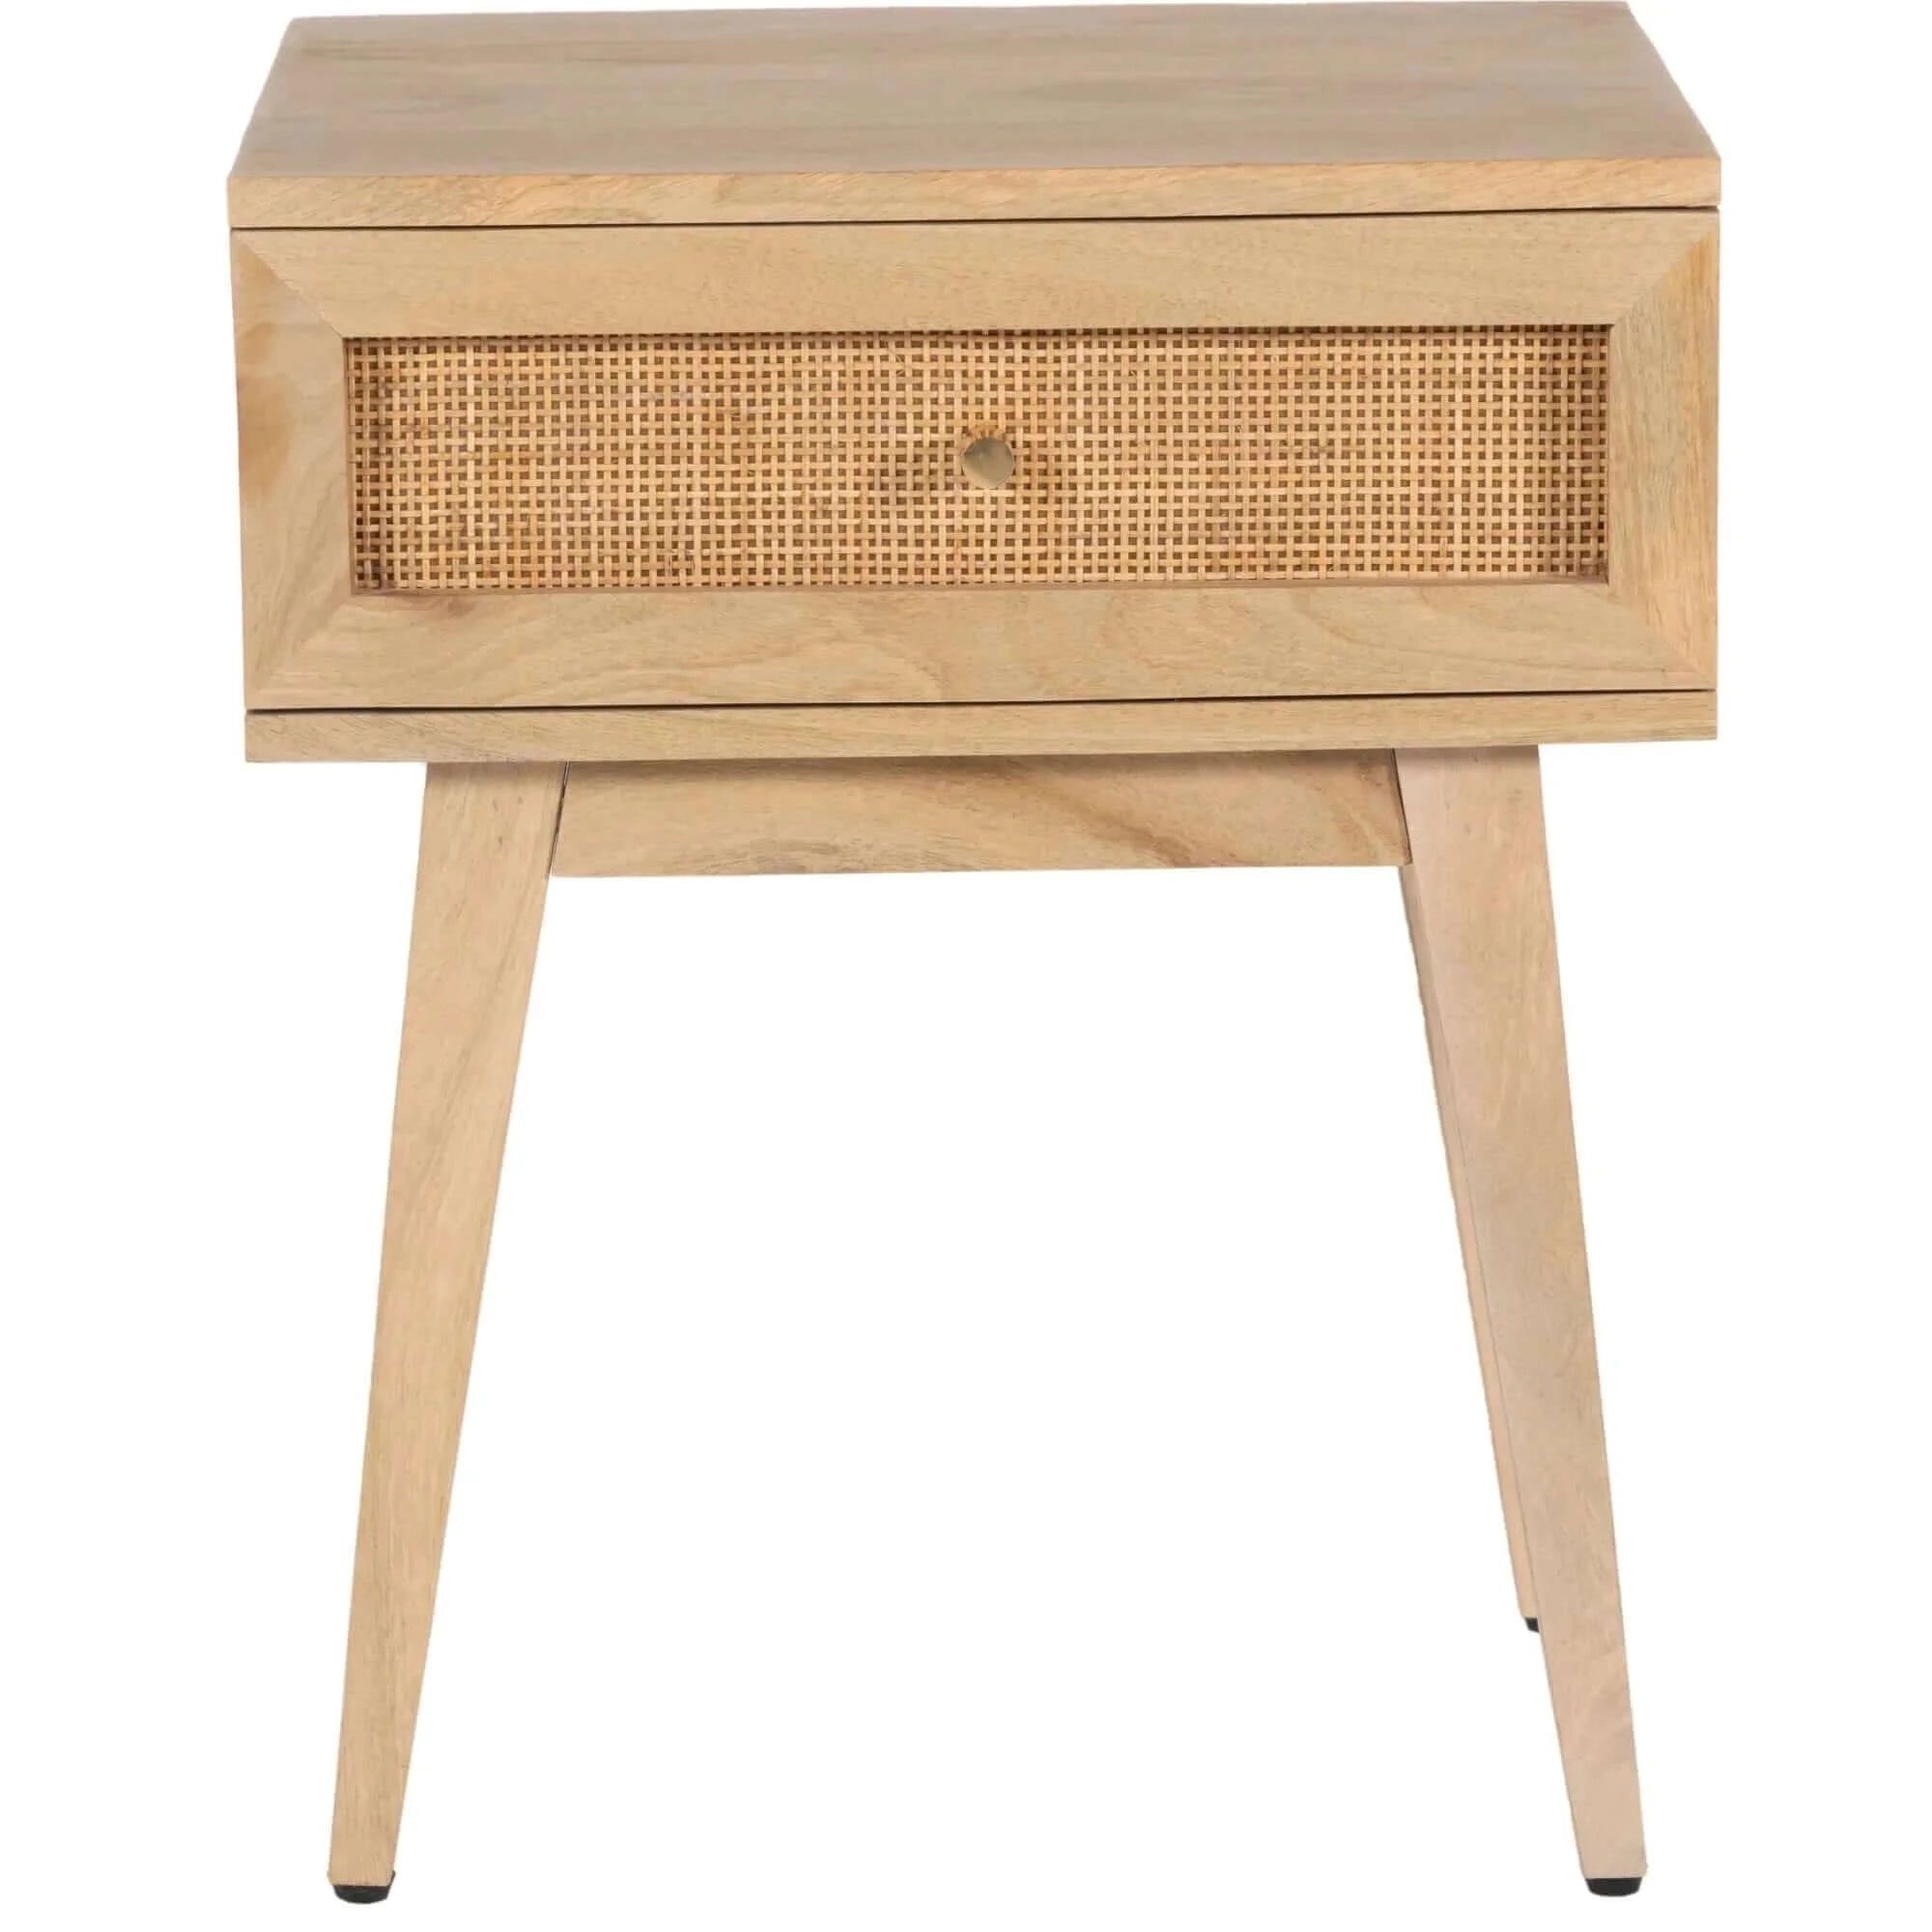 Buy olearia bedside table 1 drawer storage cabinet solid mango wood rattan natural - upinteriors-Upinteriors